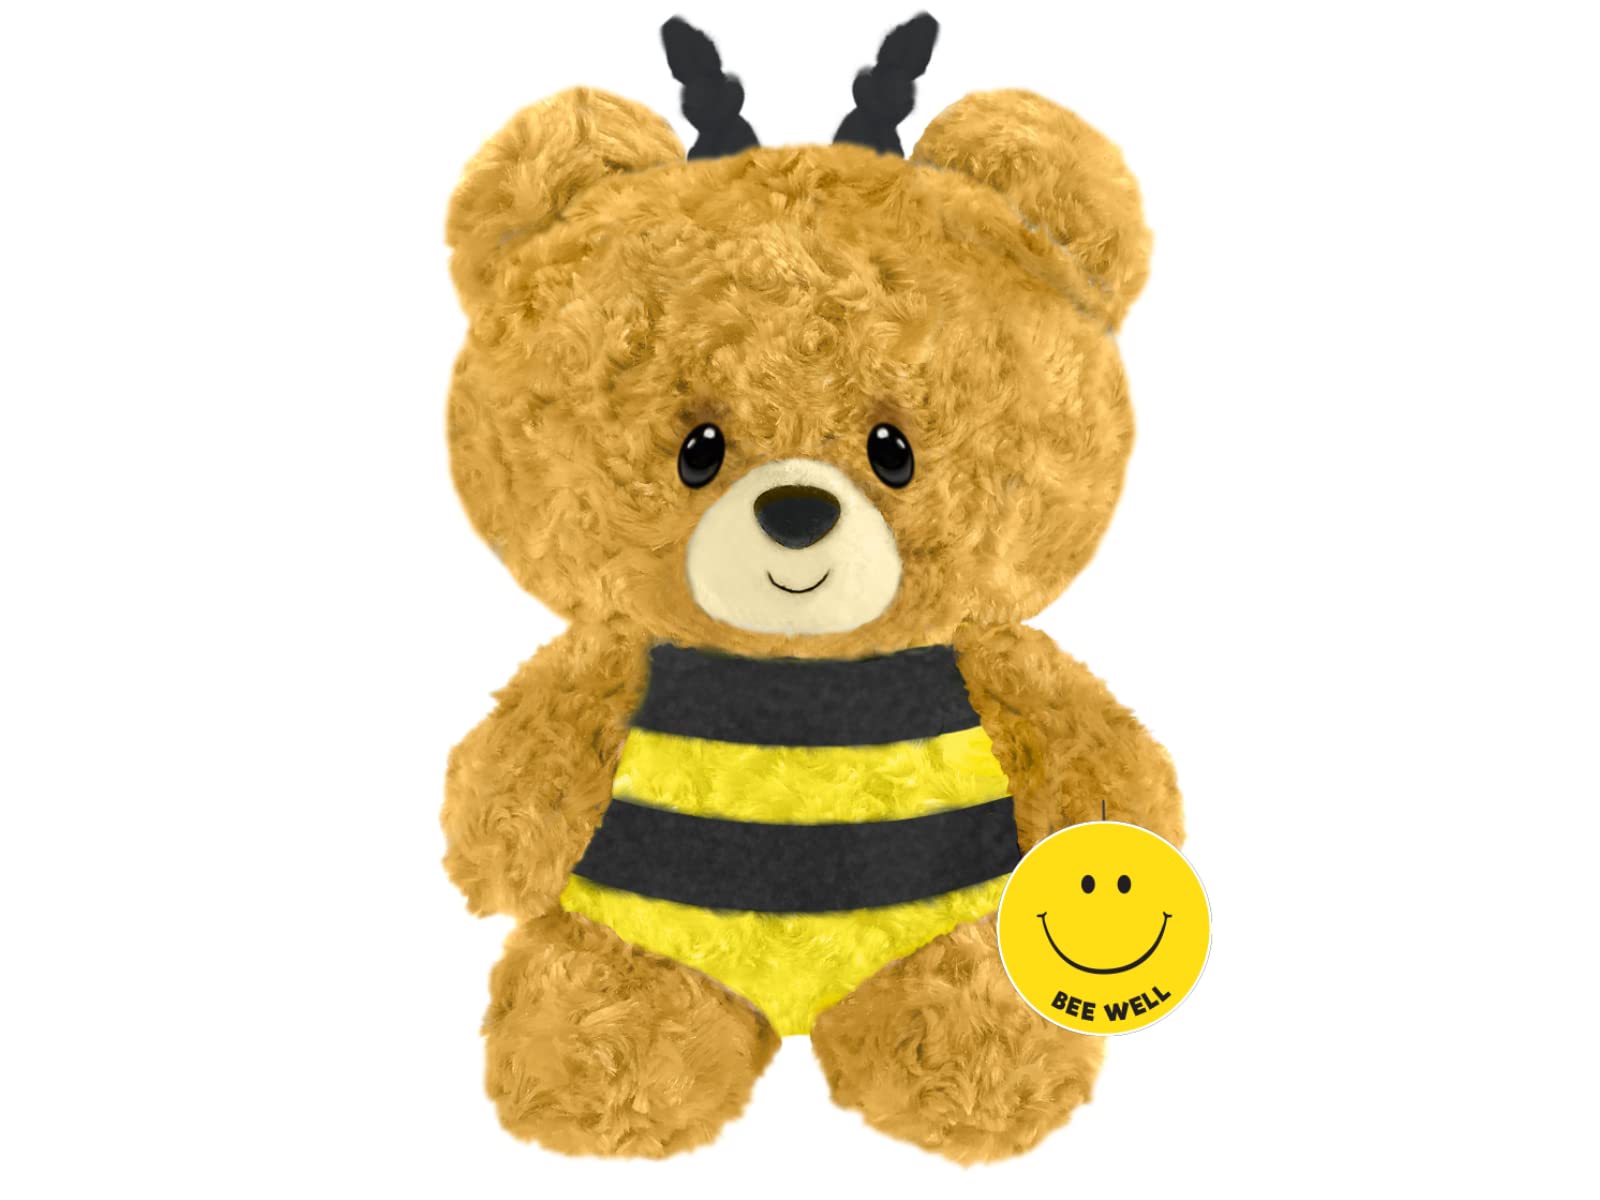 Bee Bear Get Well Teddy Bear Stuffed Animal - "Bee Well" Bear w/ Jelly Beans, 2 Pc Get Well Soon Gifts For Women, Men or Kids, Great Get Well Soon Gift Basket - Comes in pretty gift bag